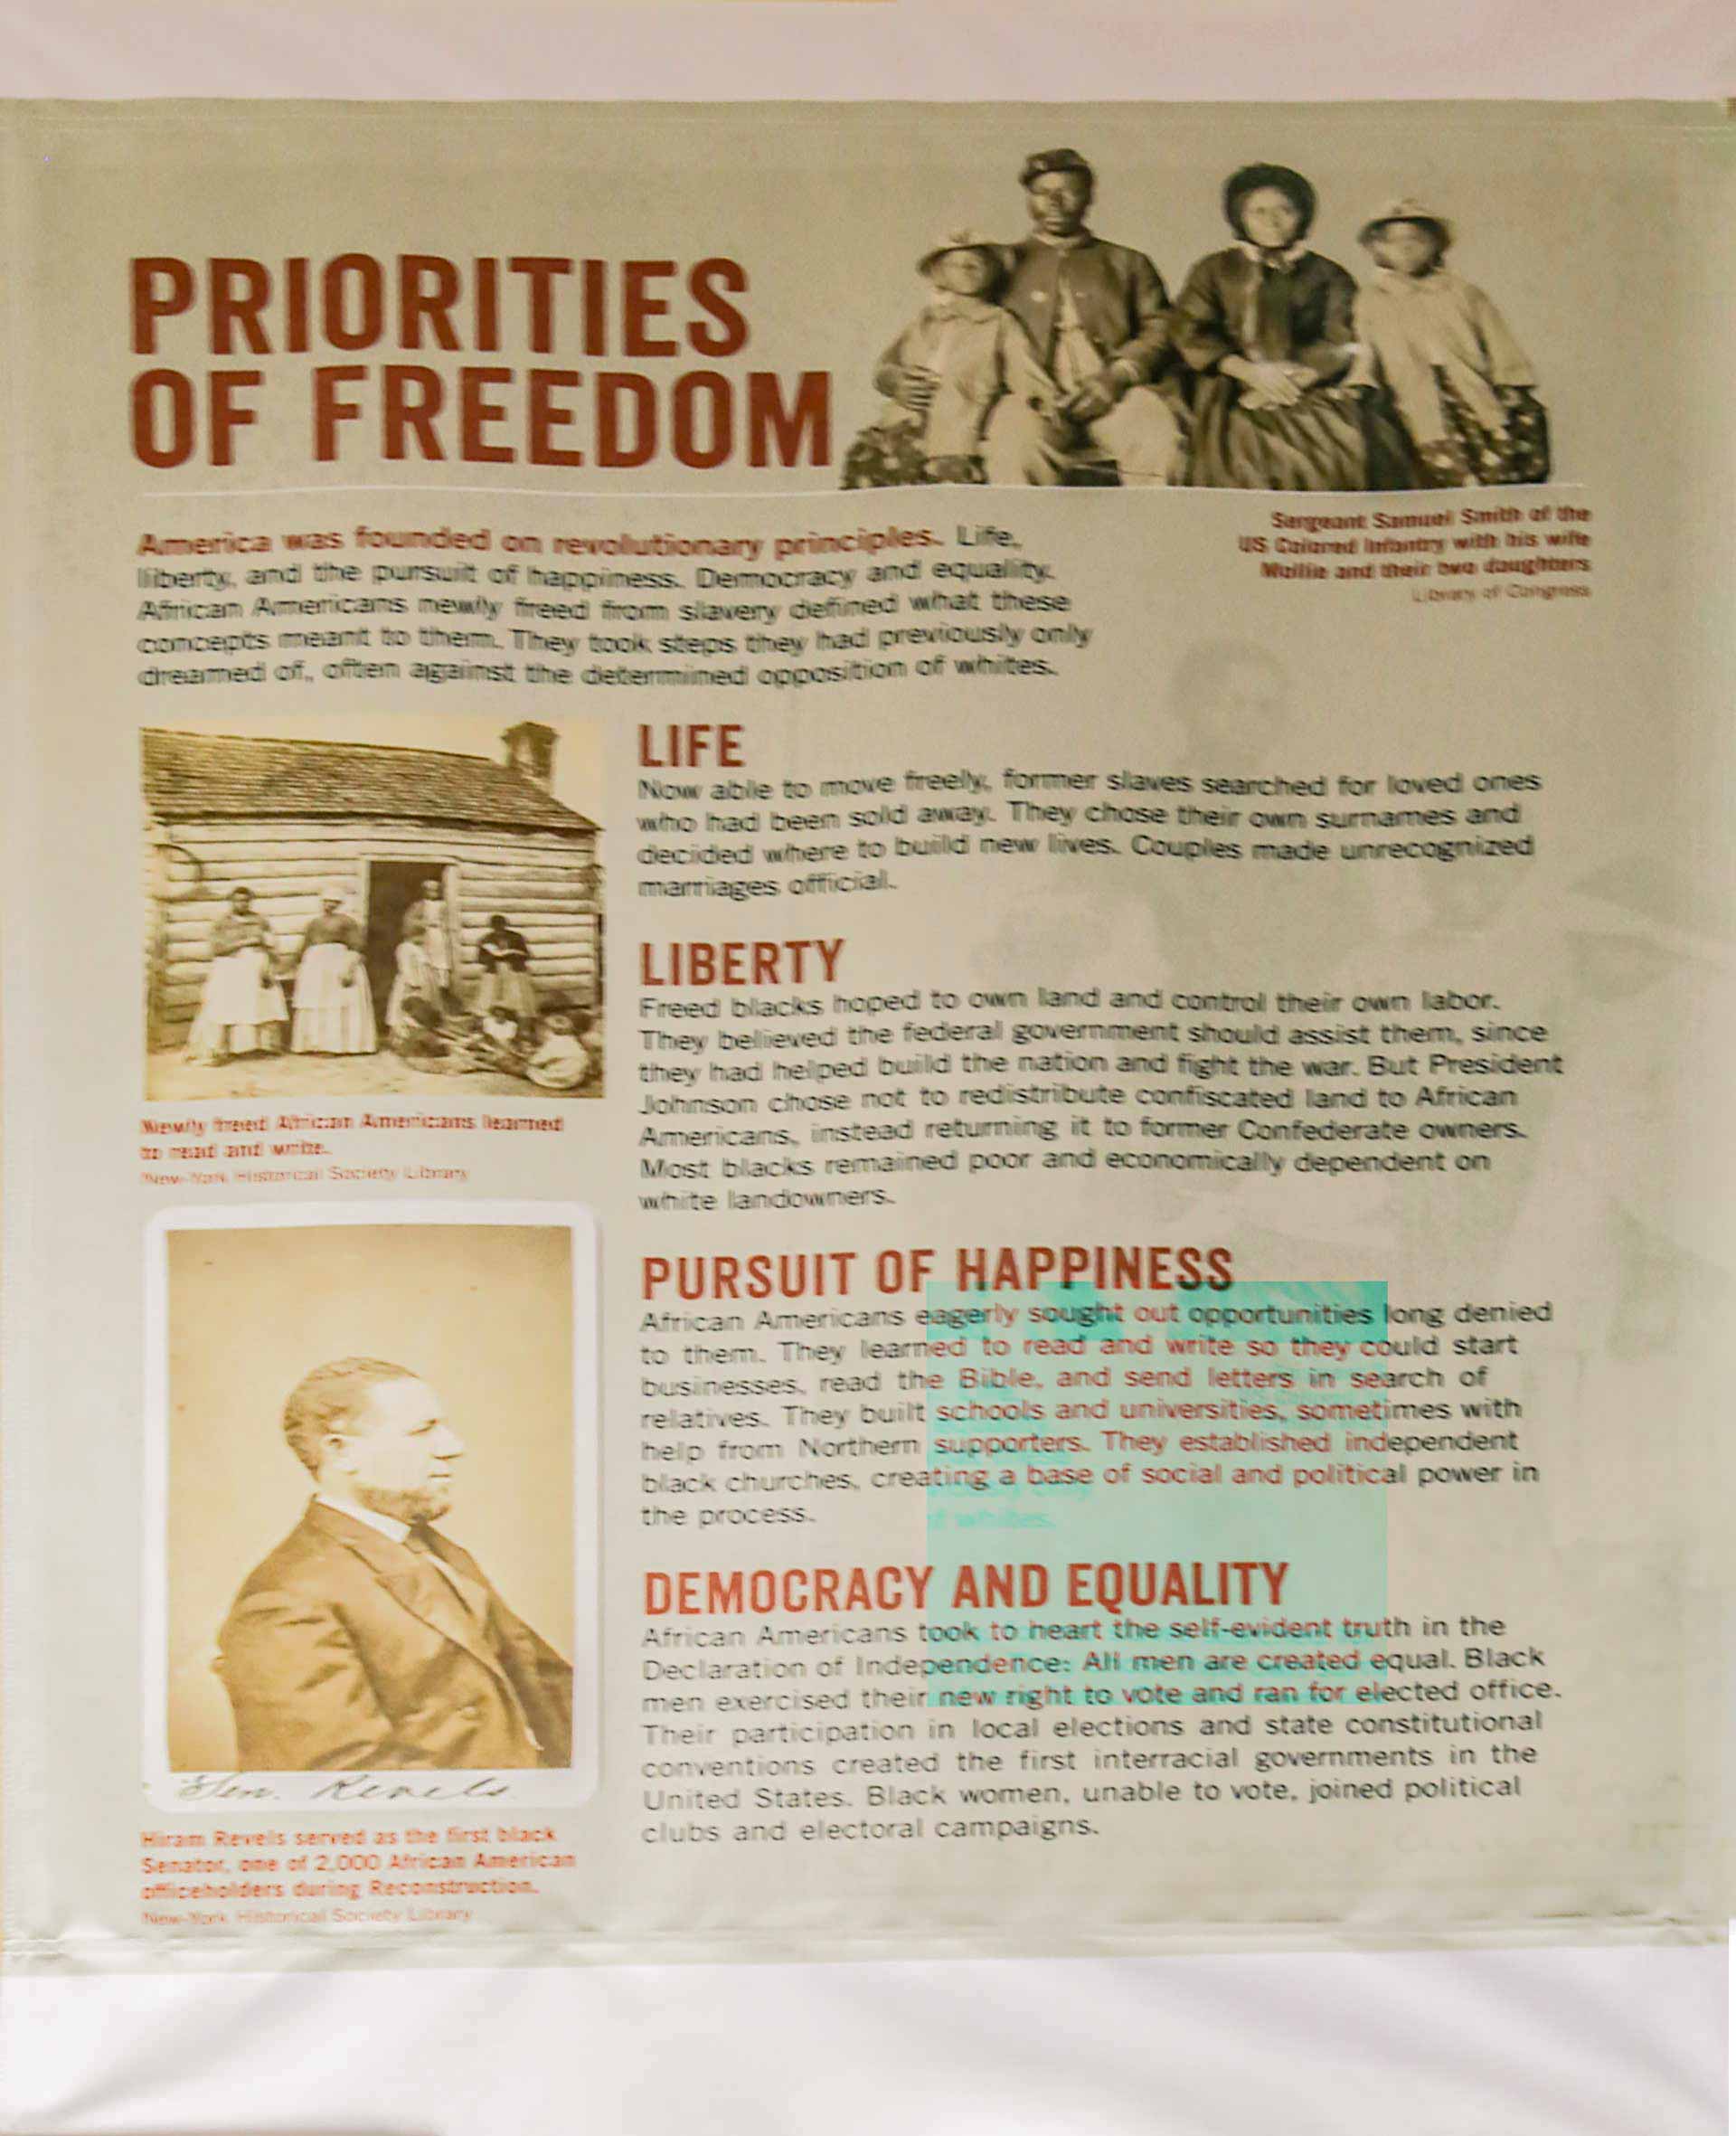 Poster about the priorites of freedom